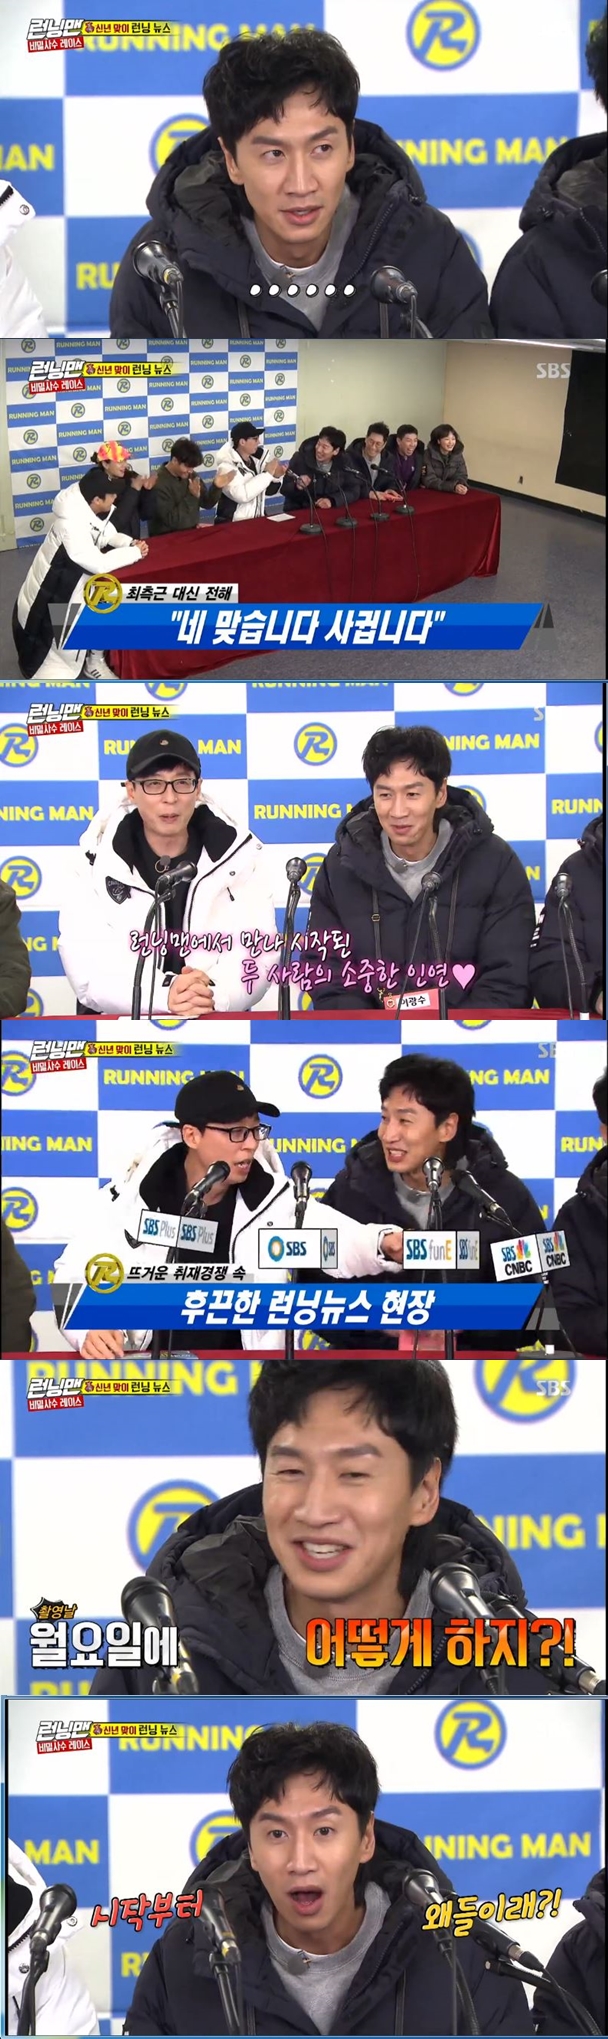 Romance rumor and Lee Kwang-soo was the most worried members.Lee Kwang-soo, who acknowledged Lee Sun-bin and his devotion, showed his position at SBS entertainment Running Man broadcast on the afternoon of the 13th.Members gathered for the opening were not able to open their mouths easily; breaking the static, Haha laughed, saying, Yes, I admit it.Lee Kwang-soo was unhappy that I do not even open and do that story first.Lee Kwang-soo said, It was Monday that I was the most worried about checking the article honestly, Lee said, asking Yo Jae-Suk to convey his feelings.But the members continued to ask questions as if they were trying to realize Lee Kwang-soos worries.Lee Kwang-soo, who was calmly answering the question at first, eventually laughed at the explosion, saying, Question one by one.Meanwhile, Jean So-min said, The two Ojagyo were me. The members said, You were also a business couple.